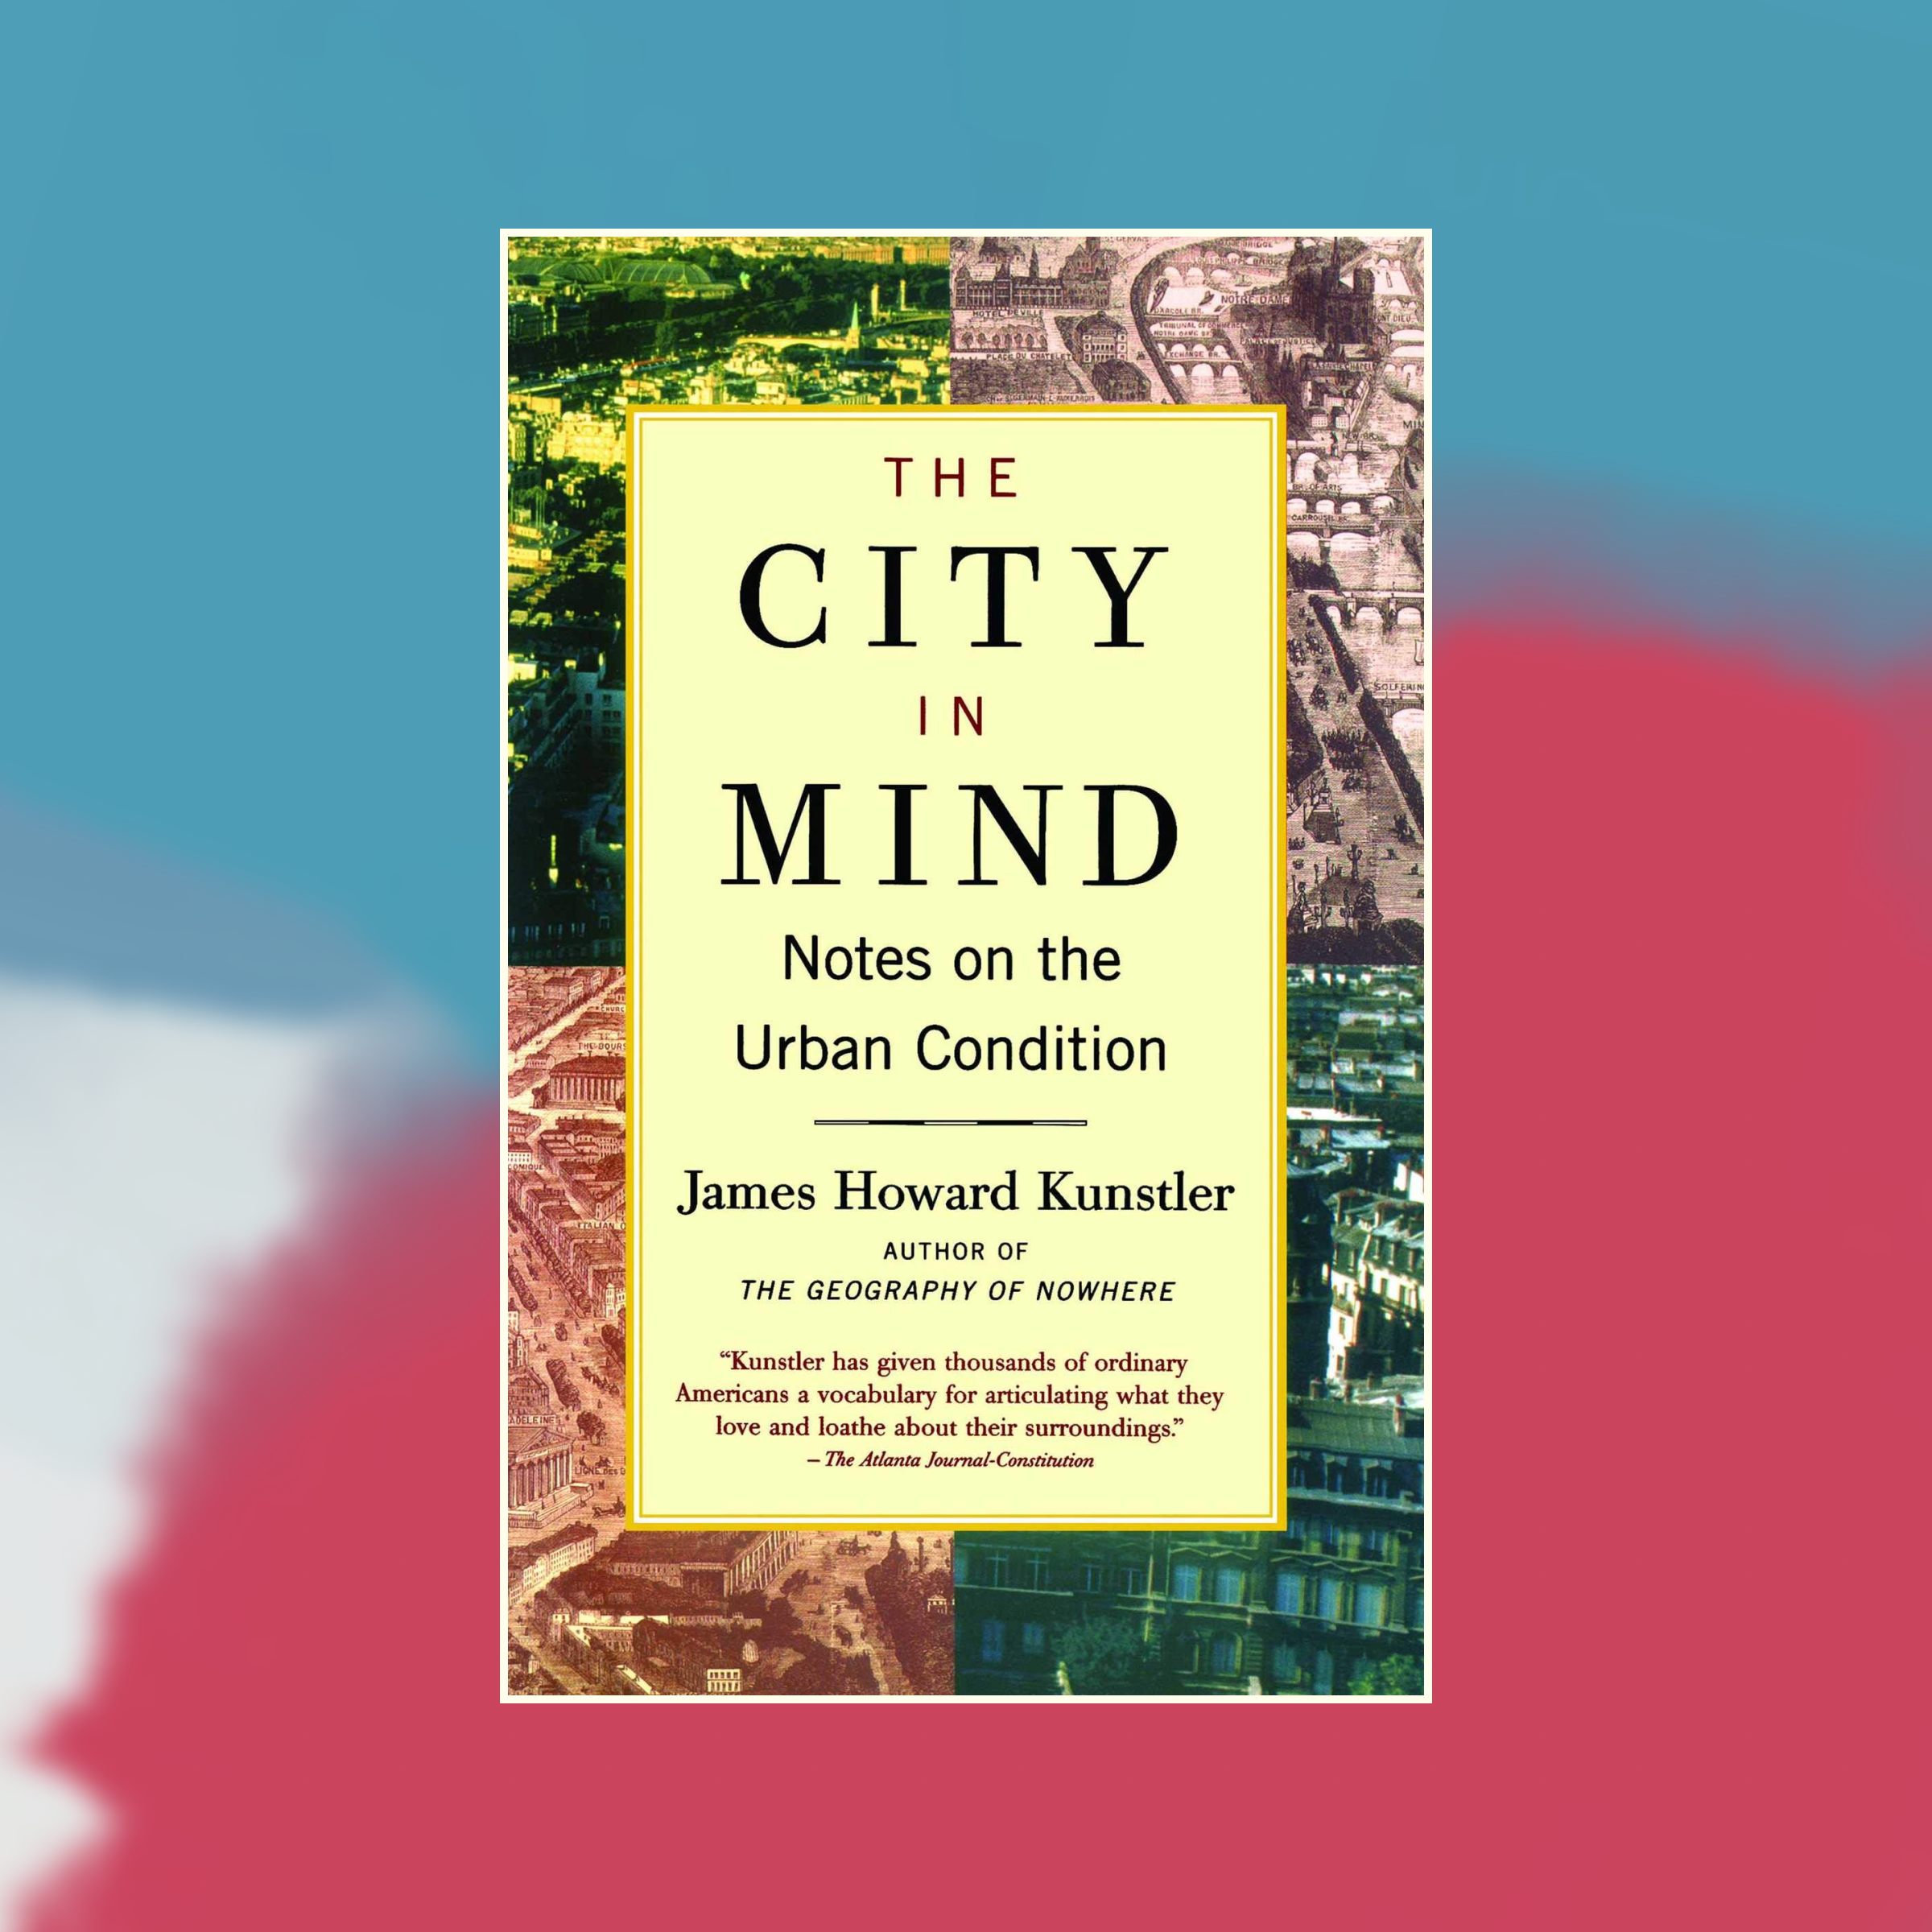 Book cover of The City In Mind against an abstract painted background